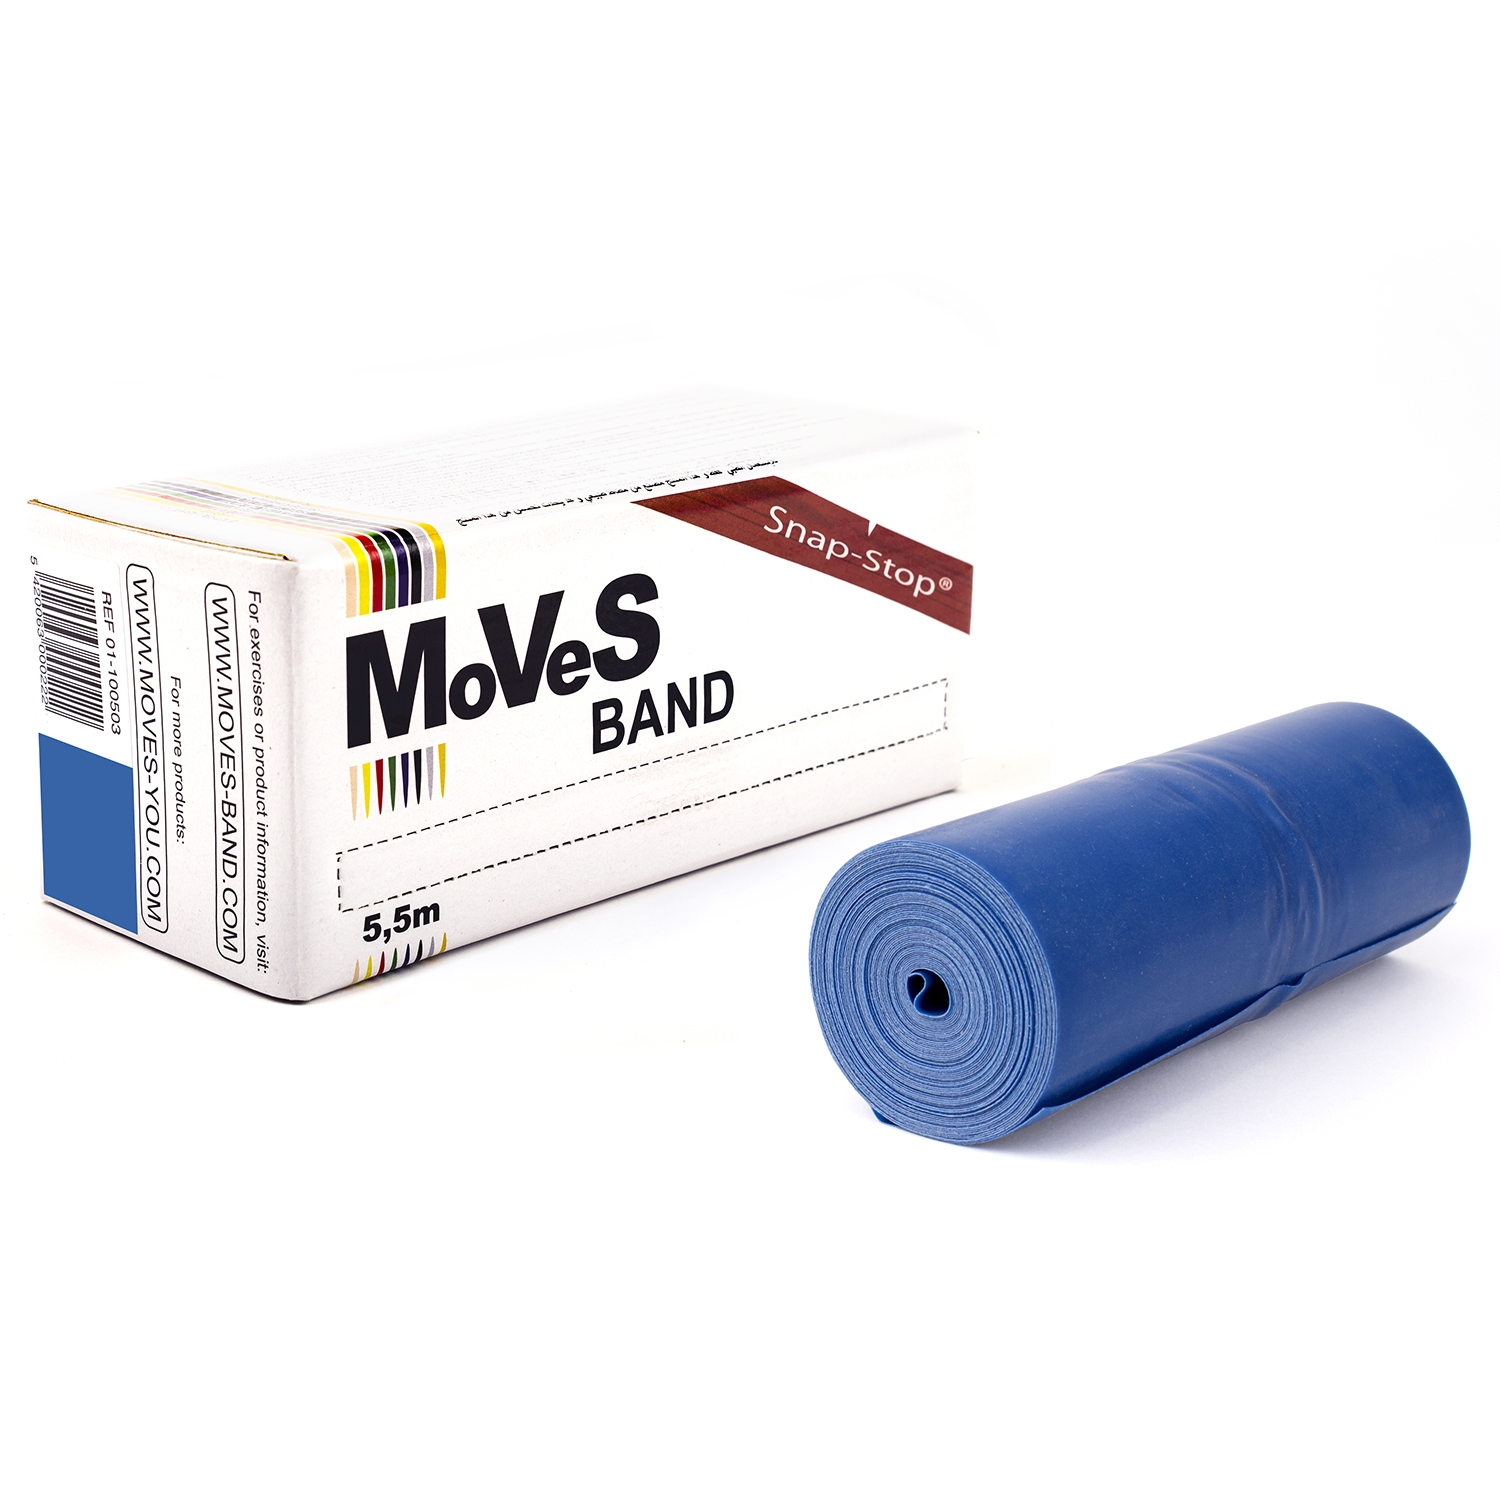 Bandes d'exercices MoVeS - 5,5 m - extra fort - bleu